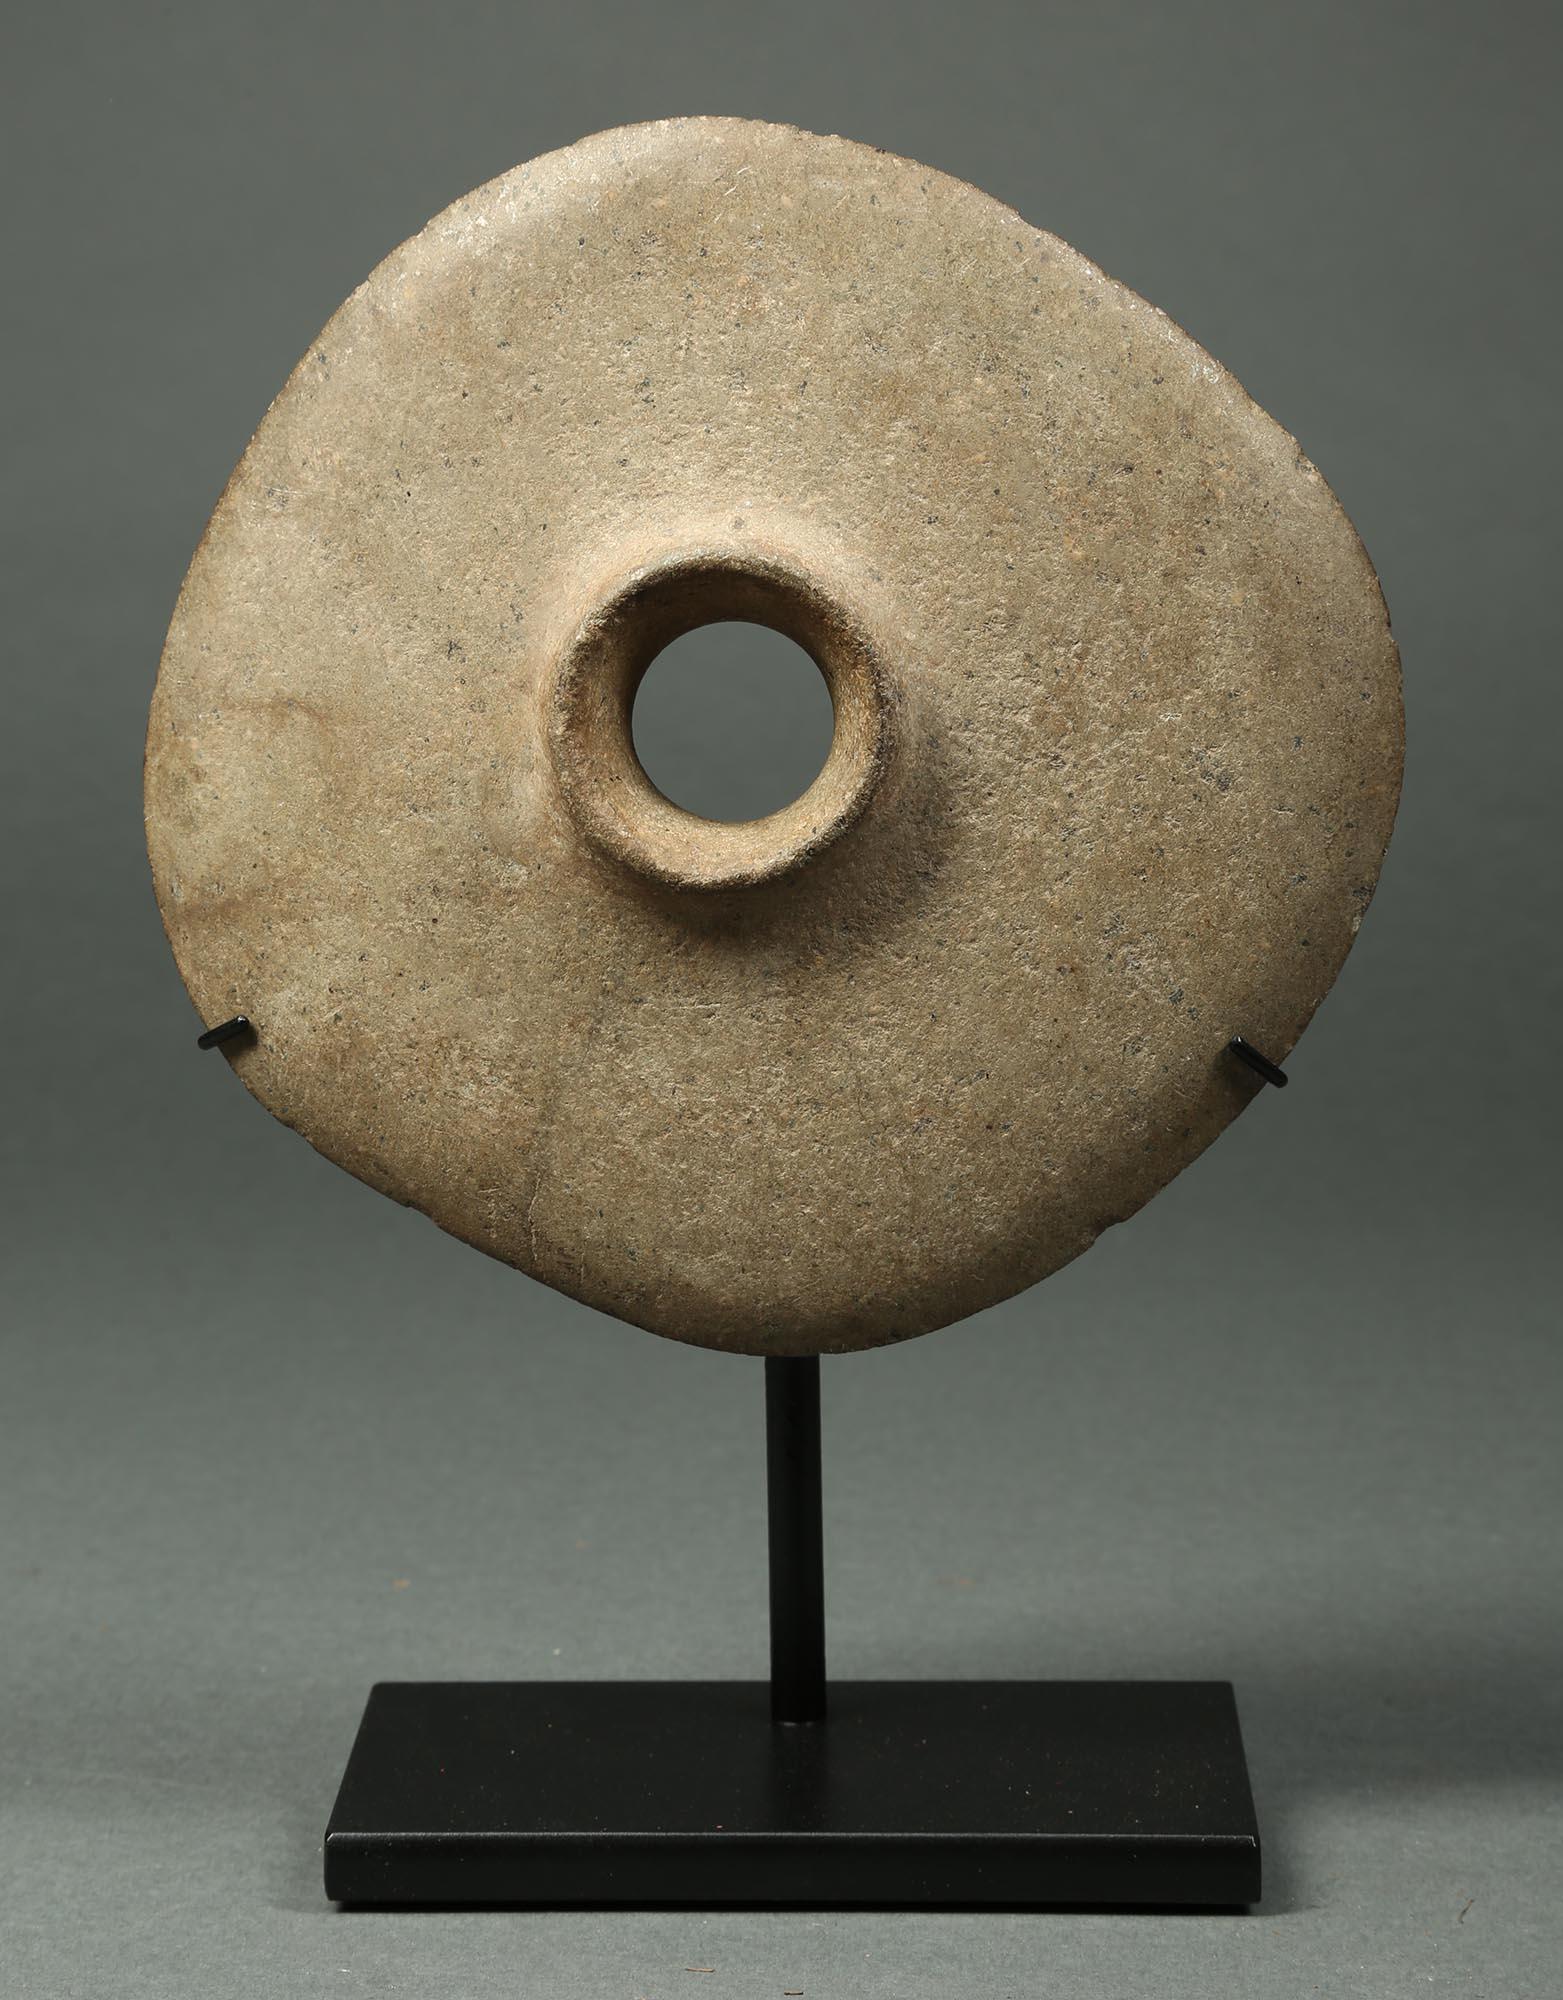 An early pre-contact ground stone disc mace head from New Guinea, with circular hole for attaching to a handle, simple raised shape around hole on one side, early 20th century or earlier. Very modern and contemporary form with a smooth feel to the